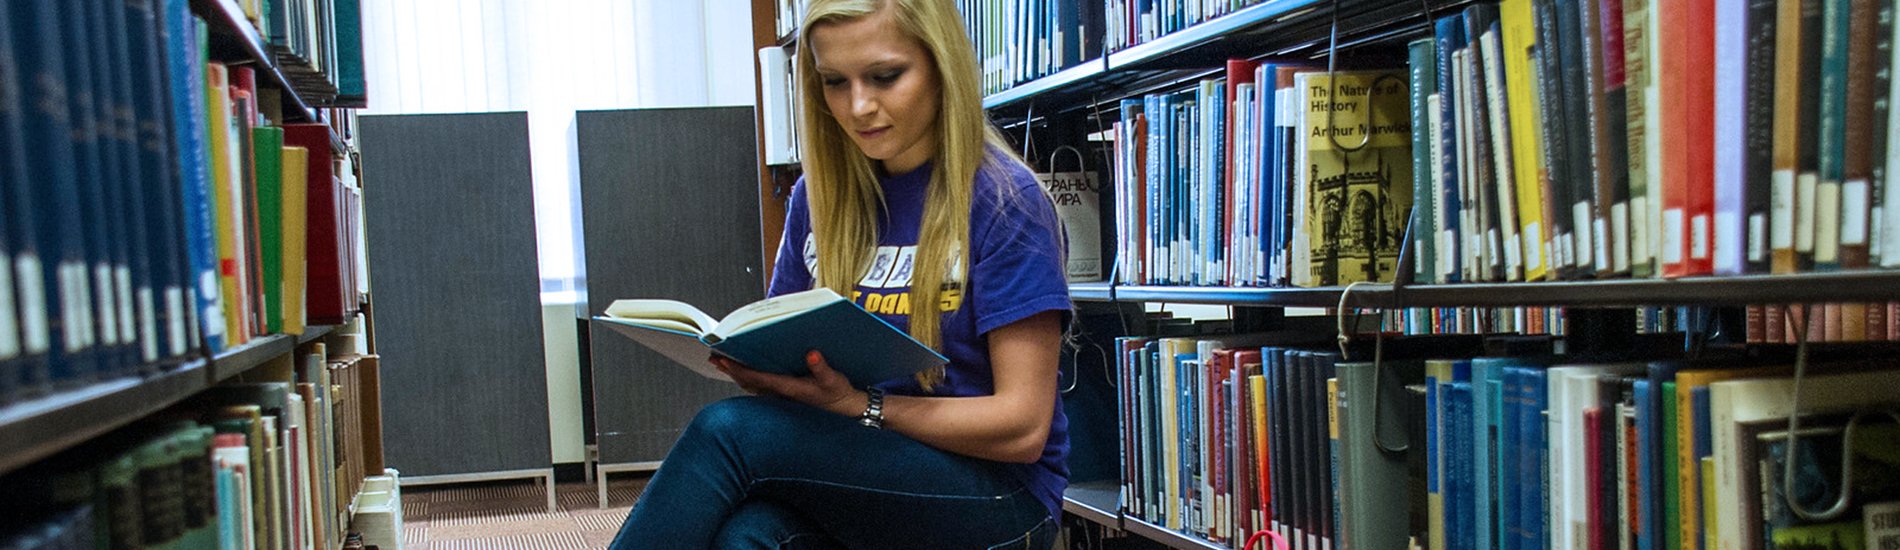 A student reading a book in the stacks of the UAlbany library.